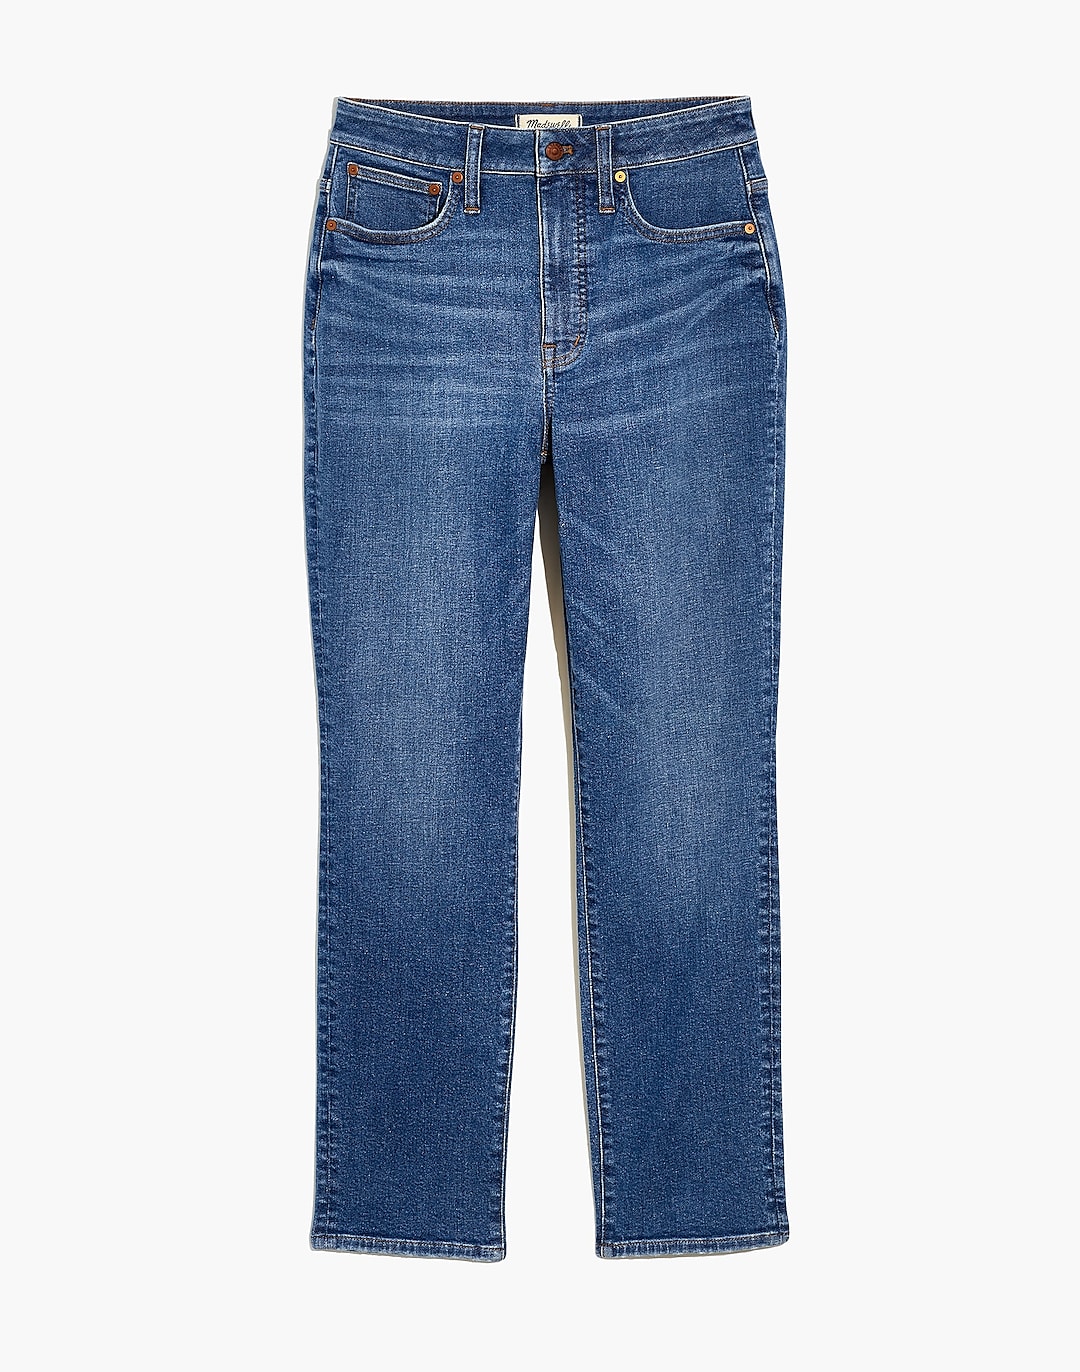 The Petite Curvy Perfect Vintage Jean in Finney Wash